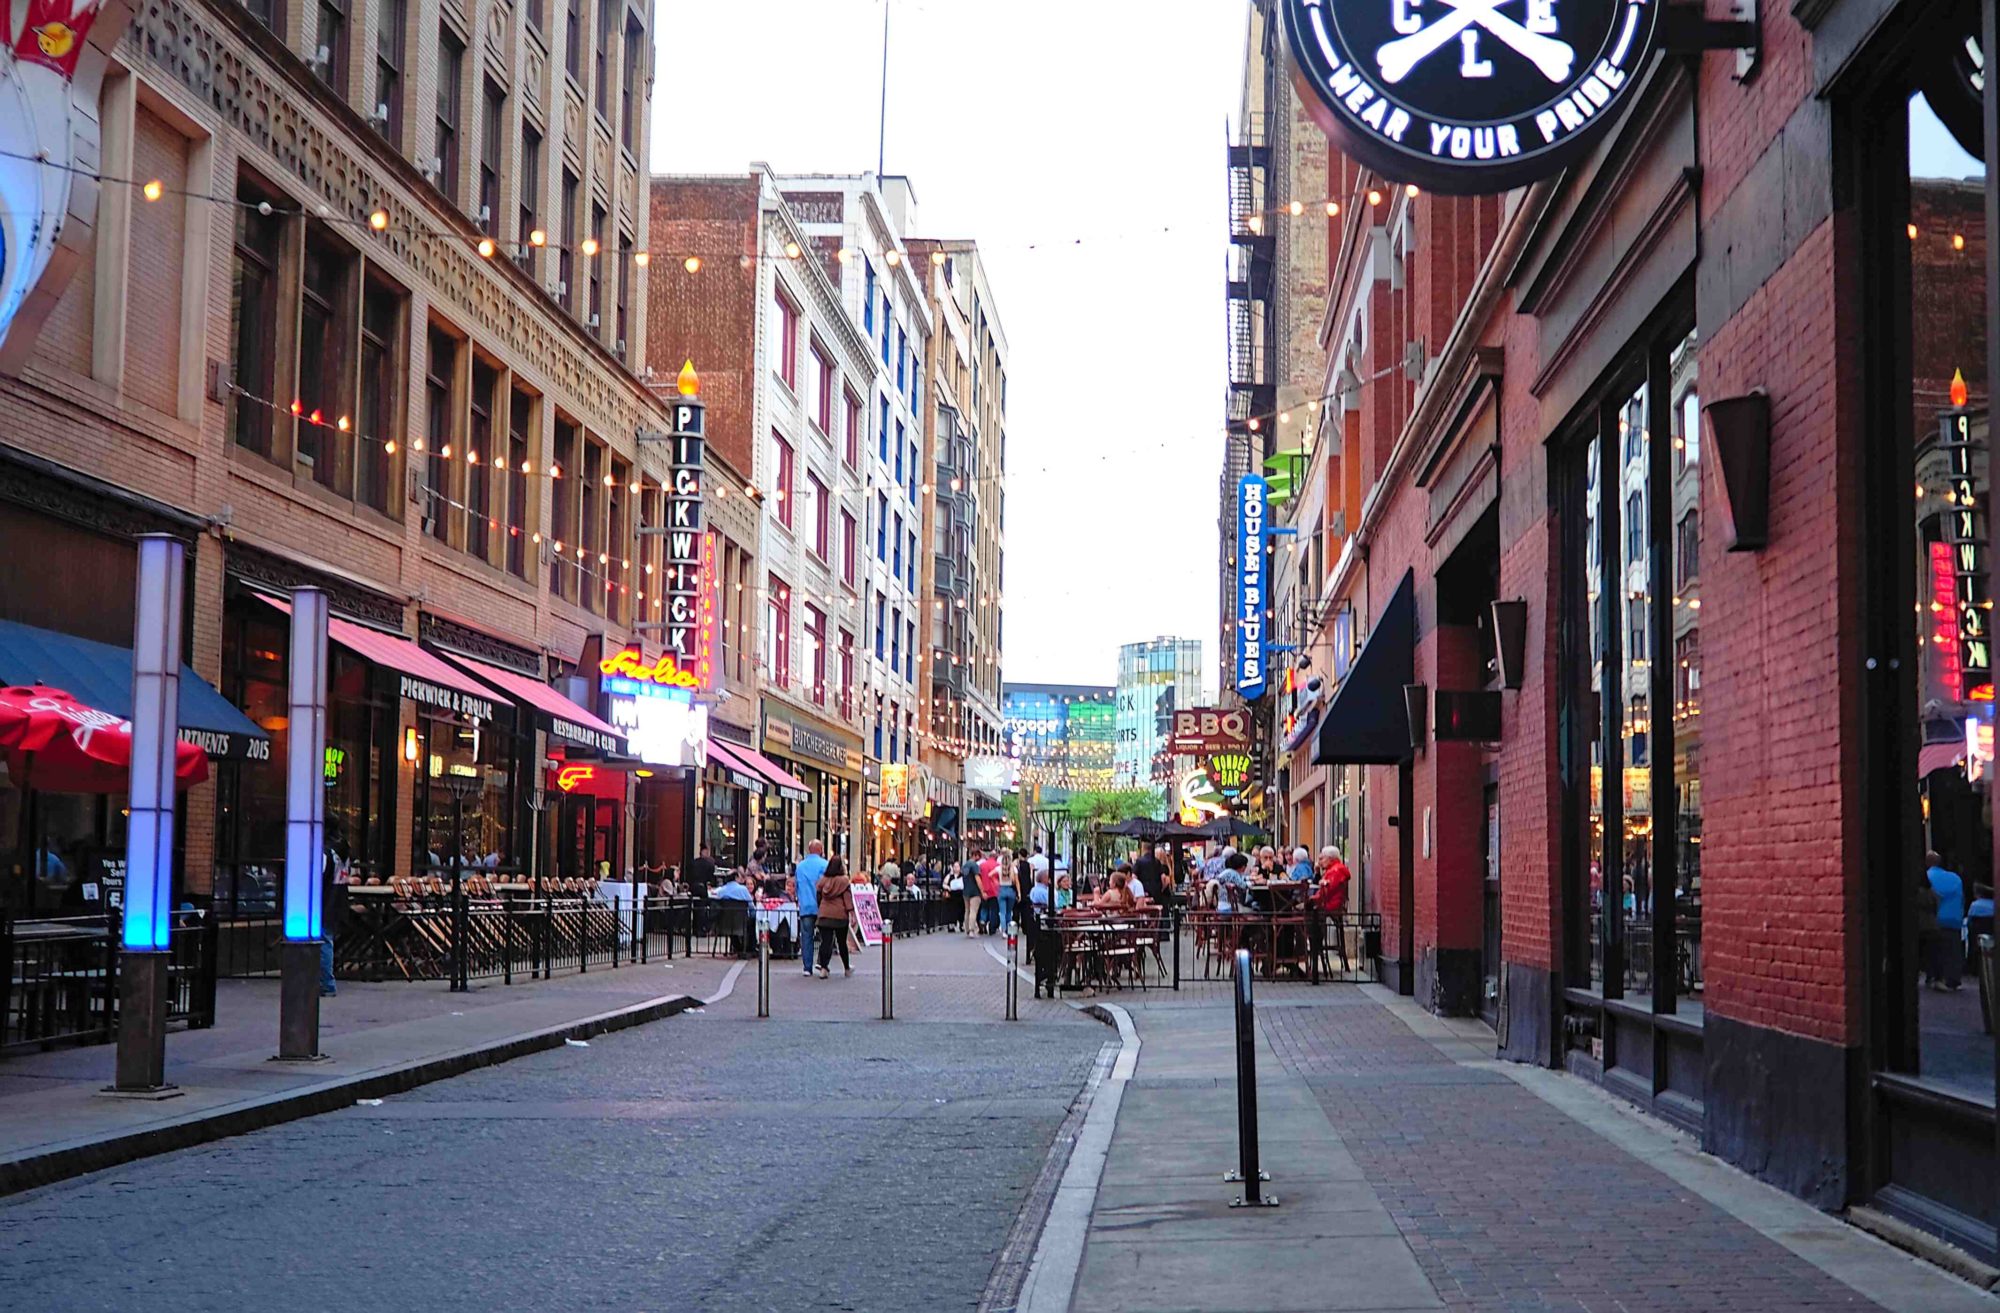 A view of East 4th Street in Cleveland